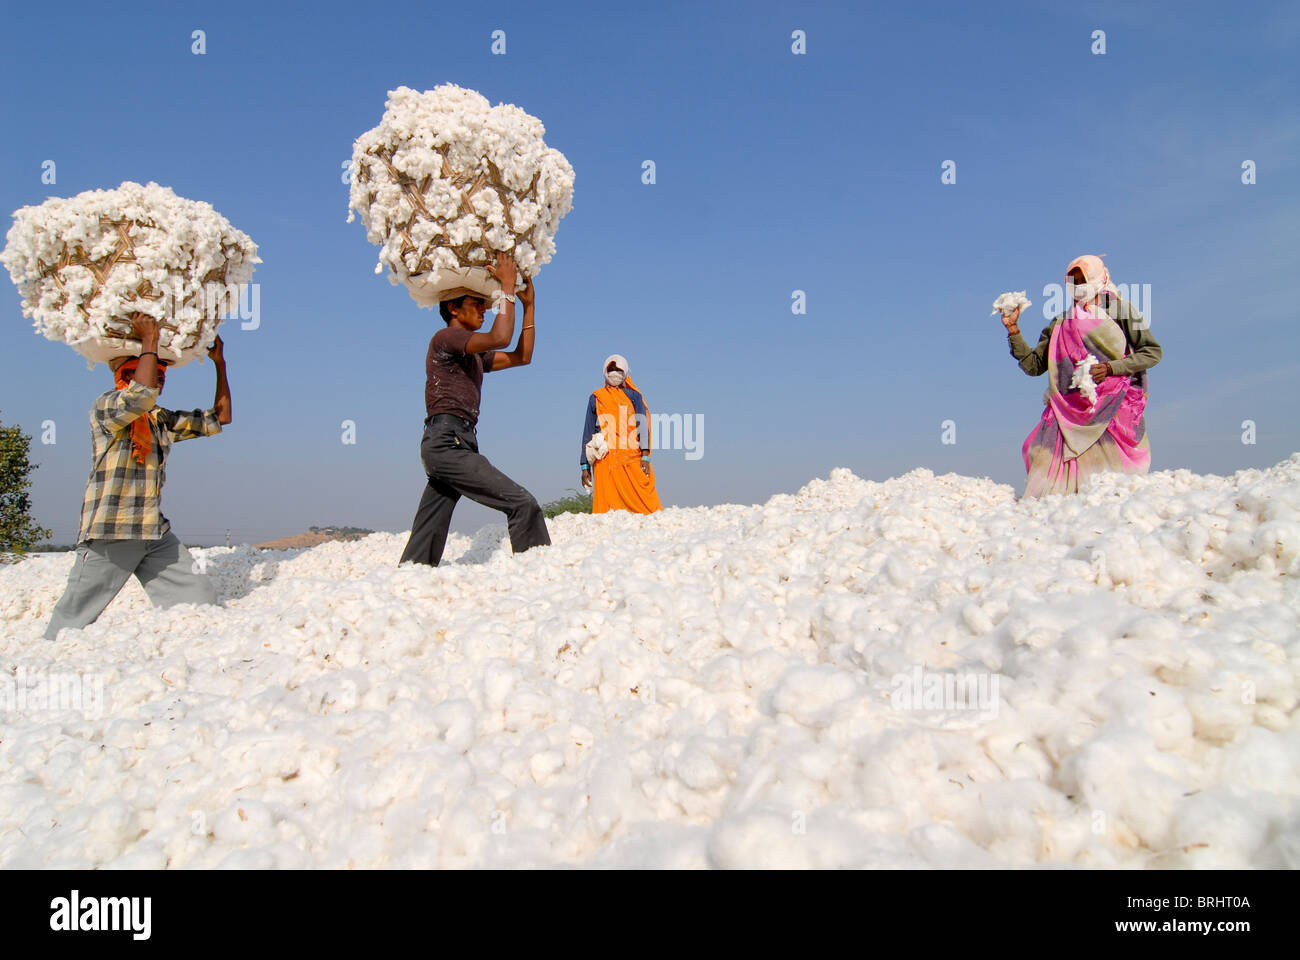 INDIA Madhya Pradesh , storage place for organic cotton at biore ginning factory - more images available for Hi-res download at www.visualindia.de Stock Photo